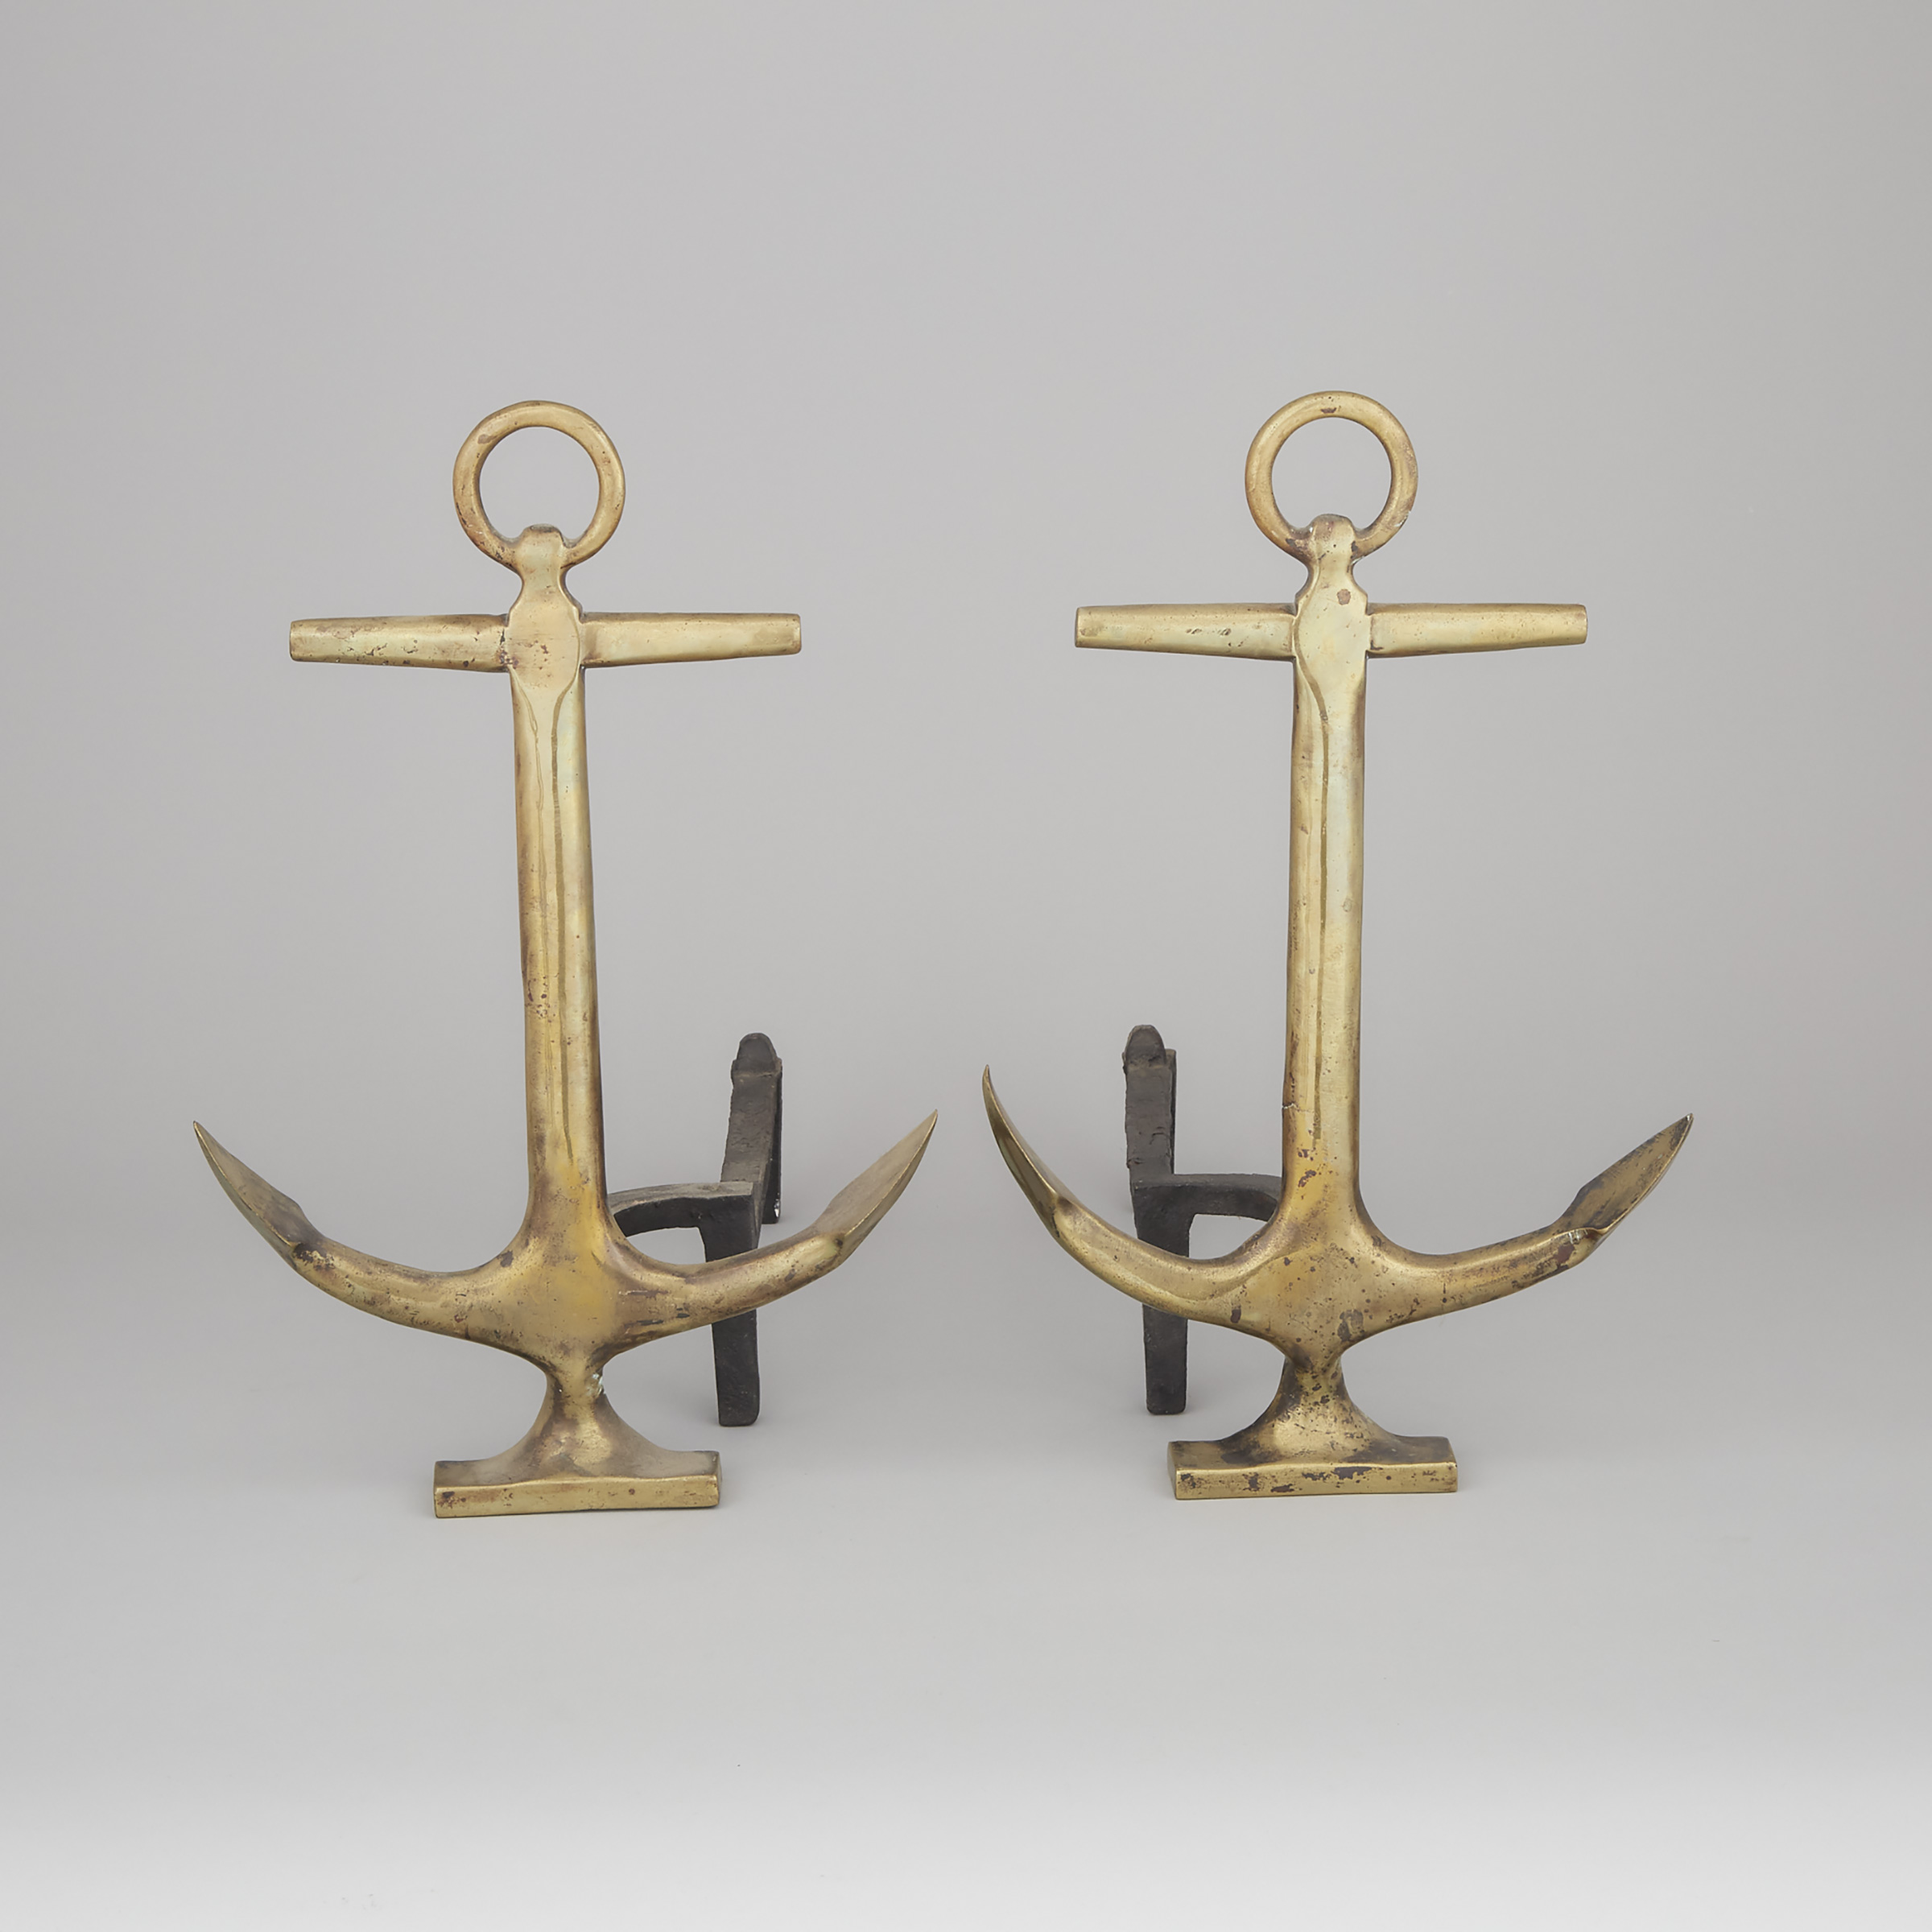 Pair of Brass Anchor Form Andirons, early-mid 20th century